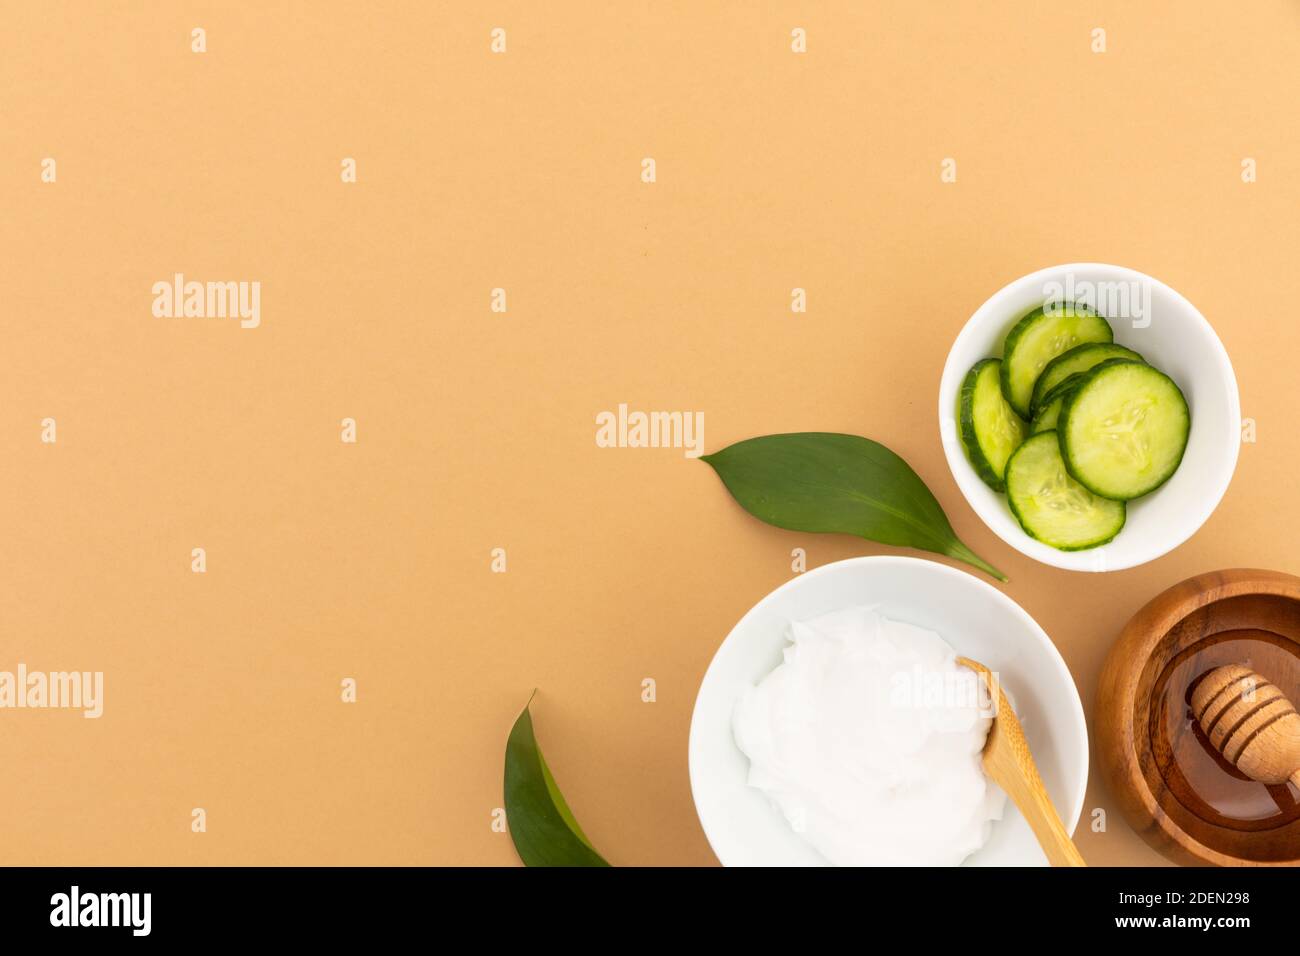 Bowls with yoghurt, cucumber and dressing on yellow background Stock Photo